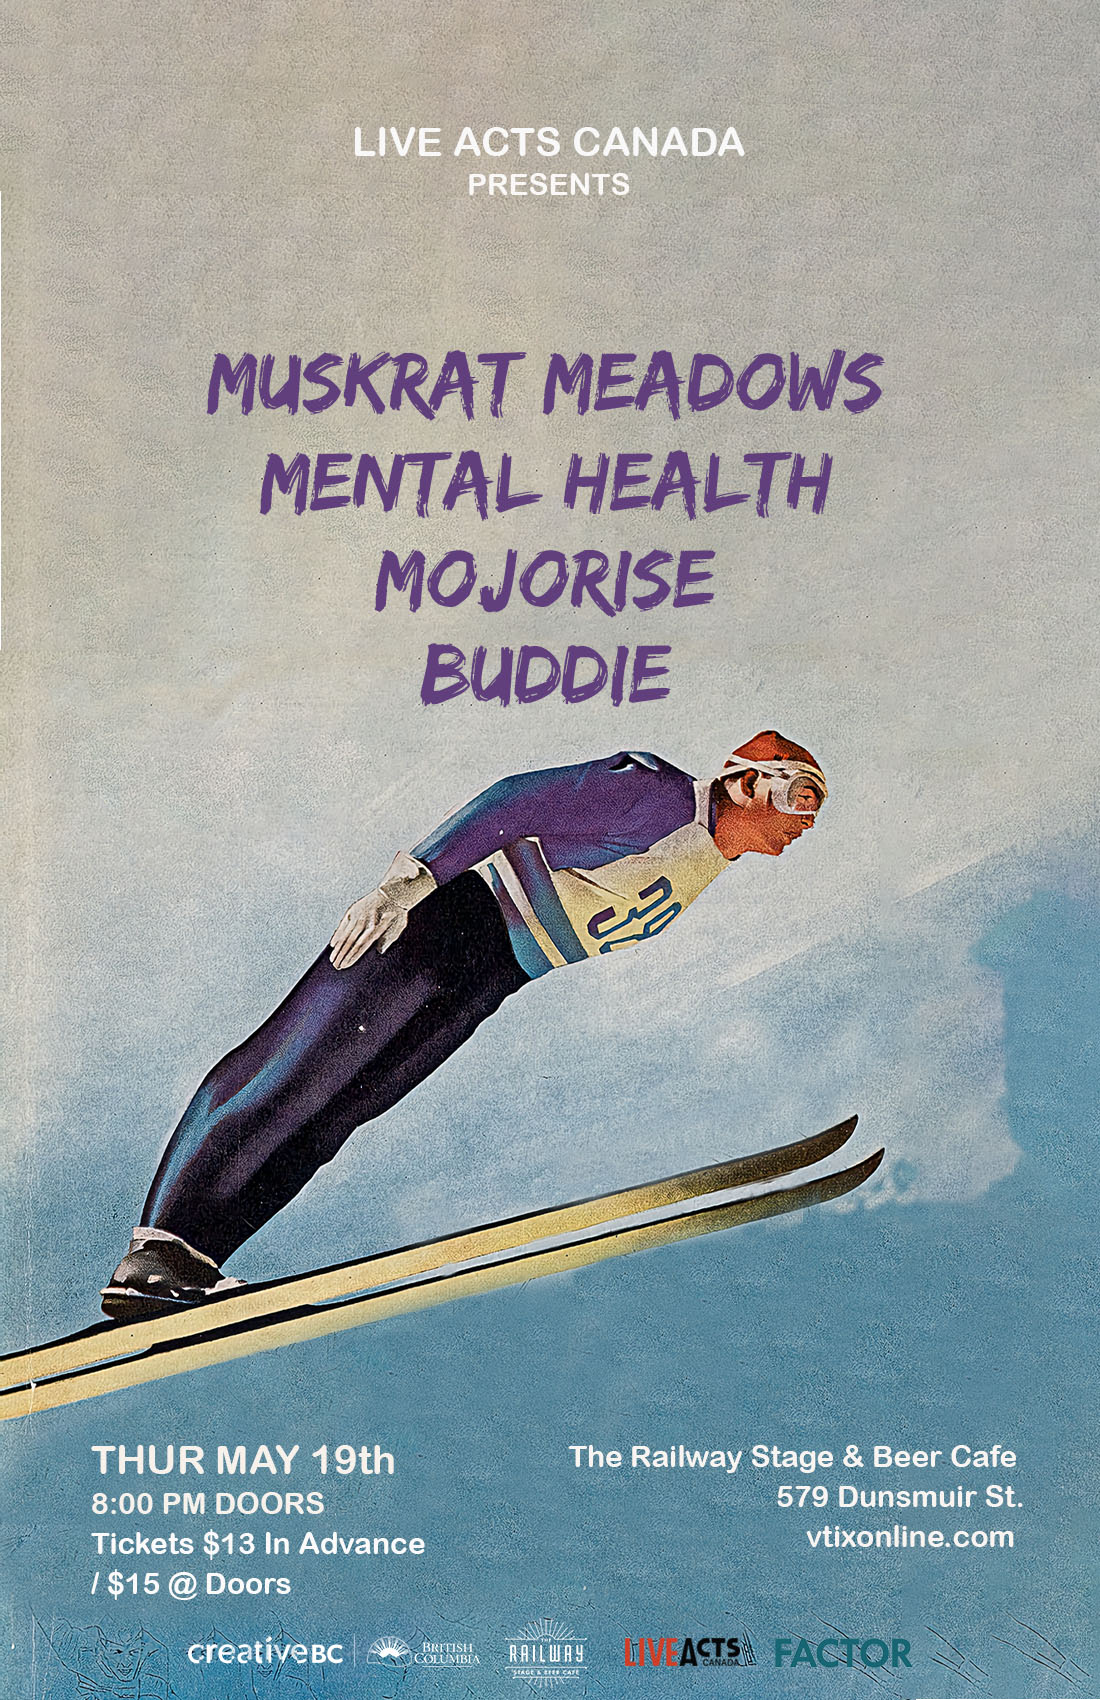 Muskrat Meadows With guests Mental Health, MojoRise, and Buddie